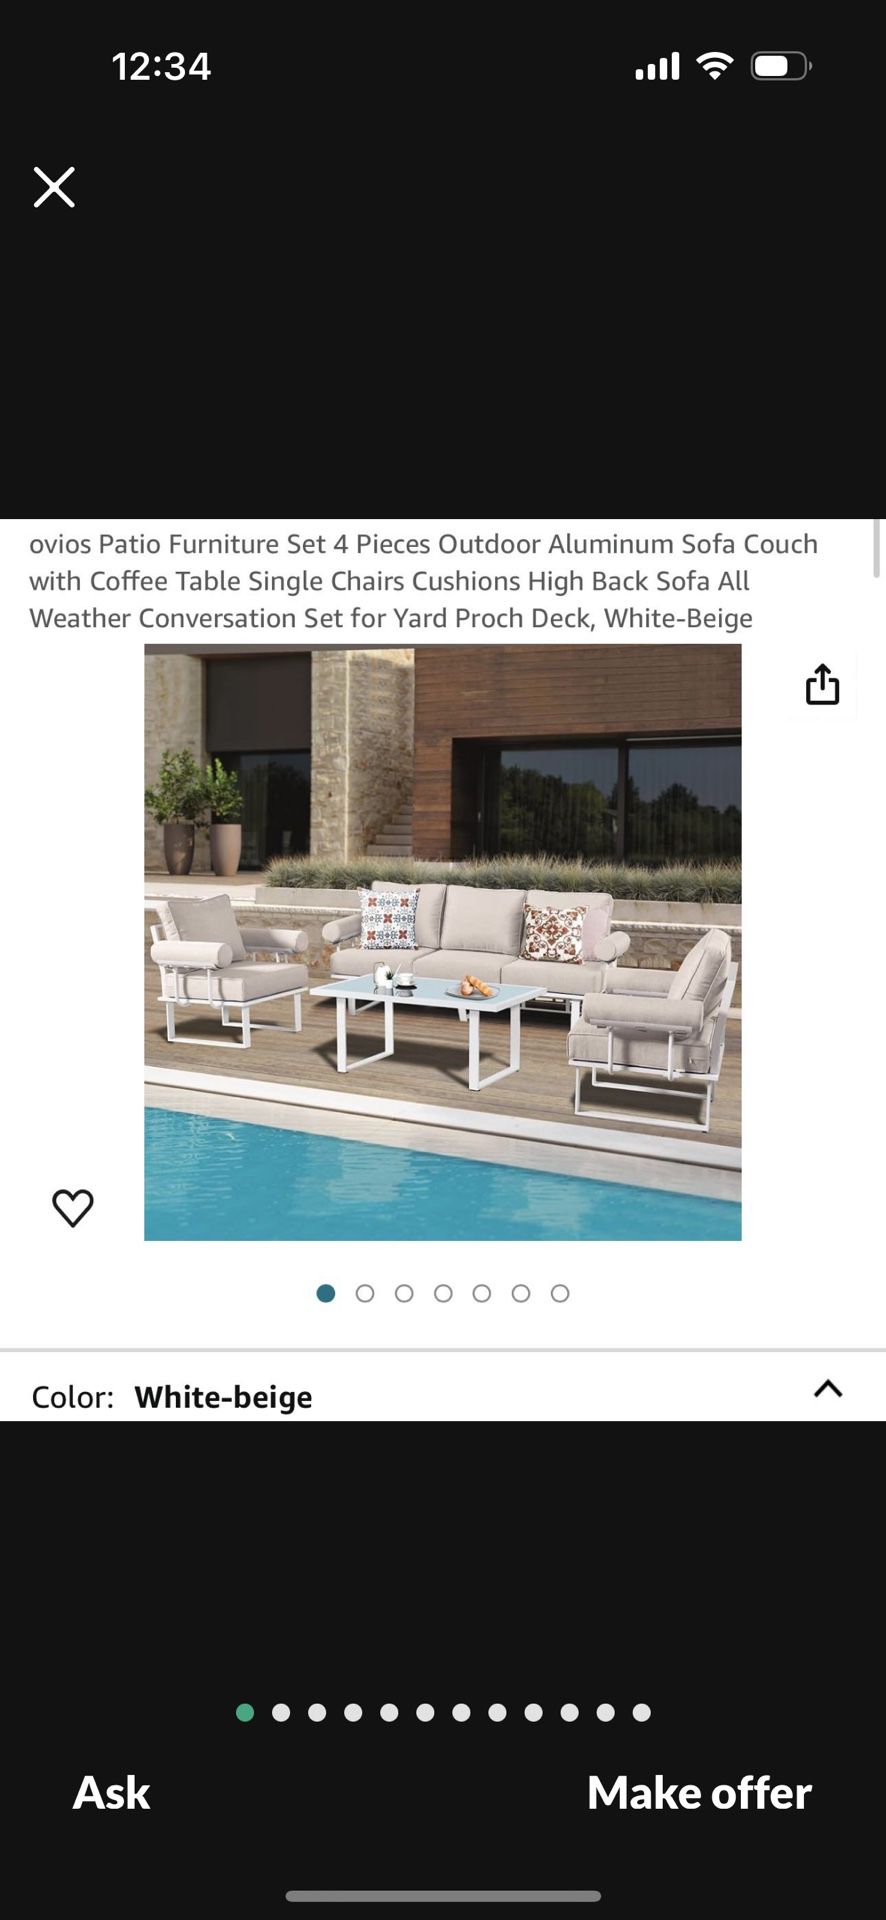 ovios Patio Furniture Set 4 Pieces Outdoor Aluminum Sofa Couch with Coffee Table Single Chairs Cushions High Back Sofa All Weather Conversation Set fo